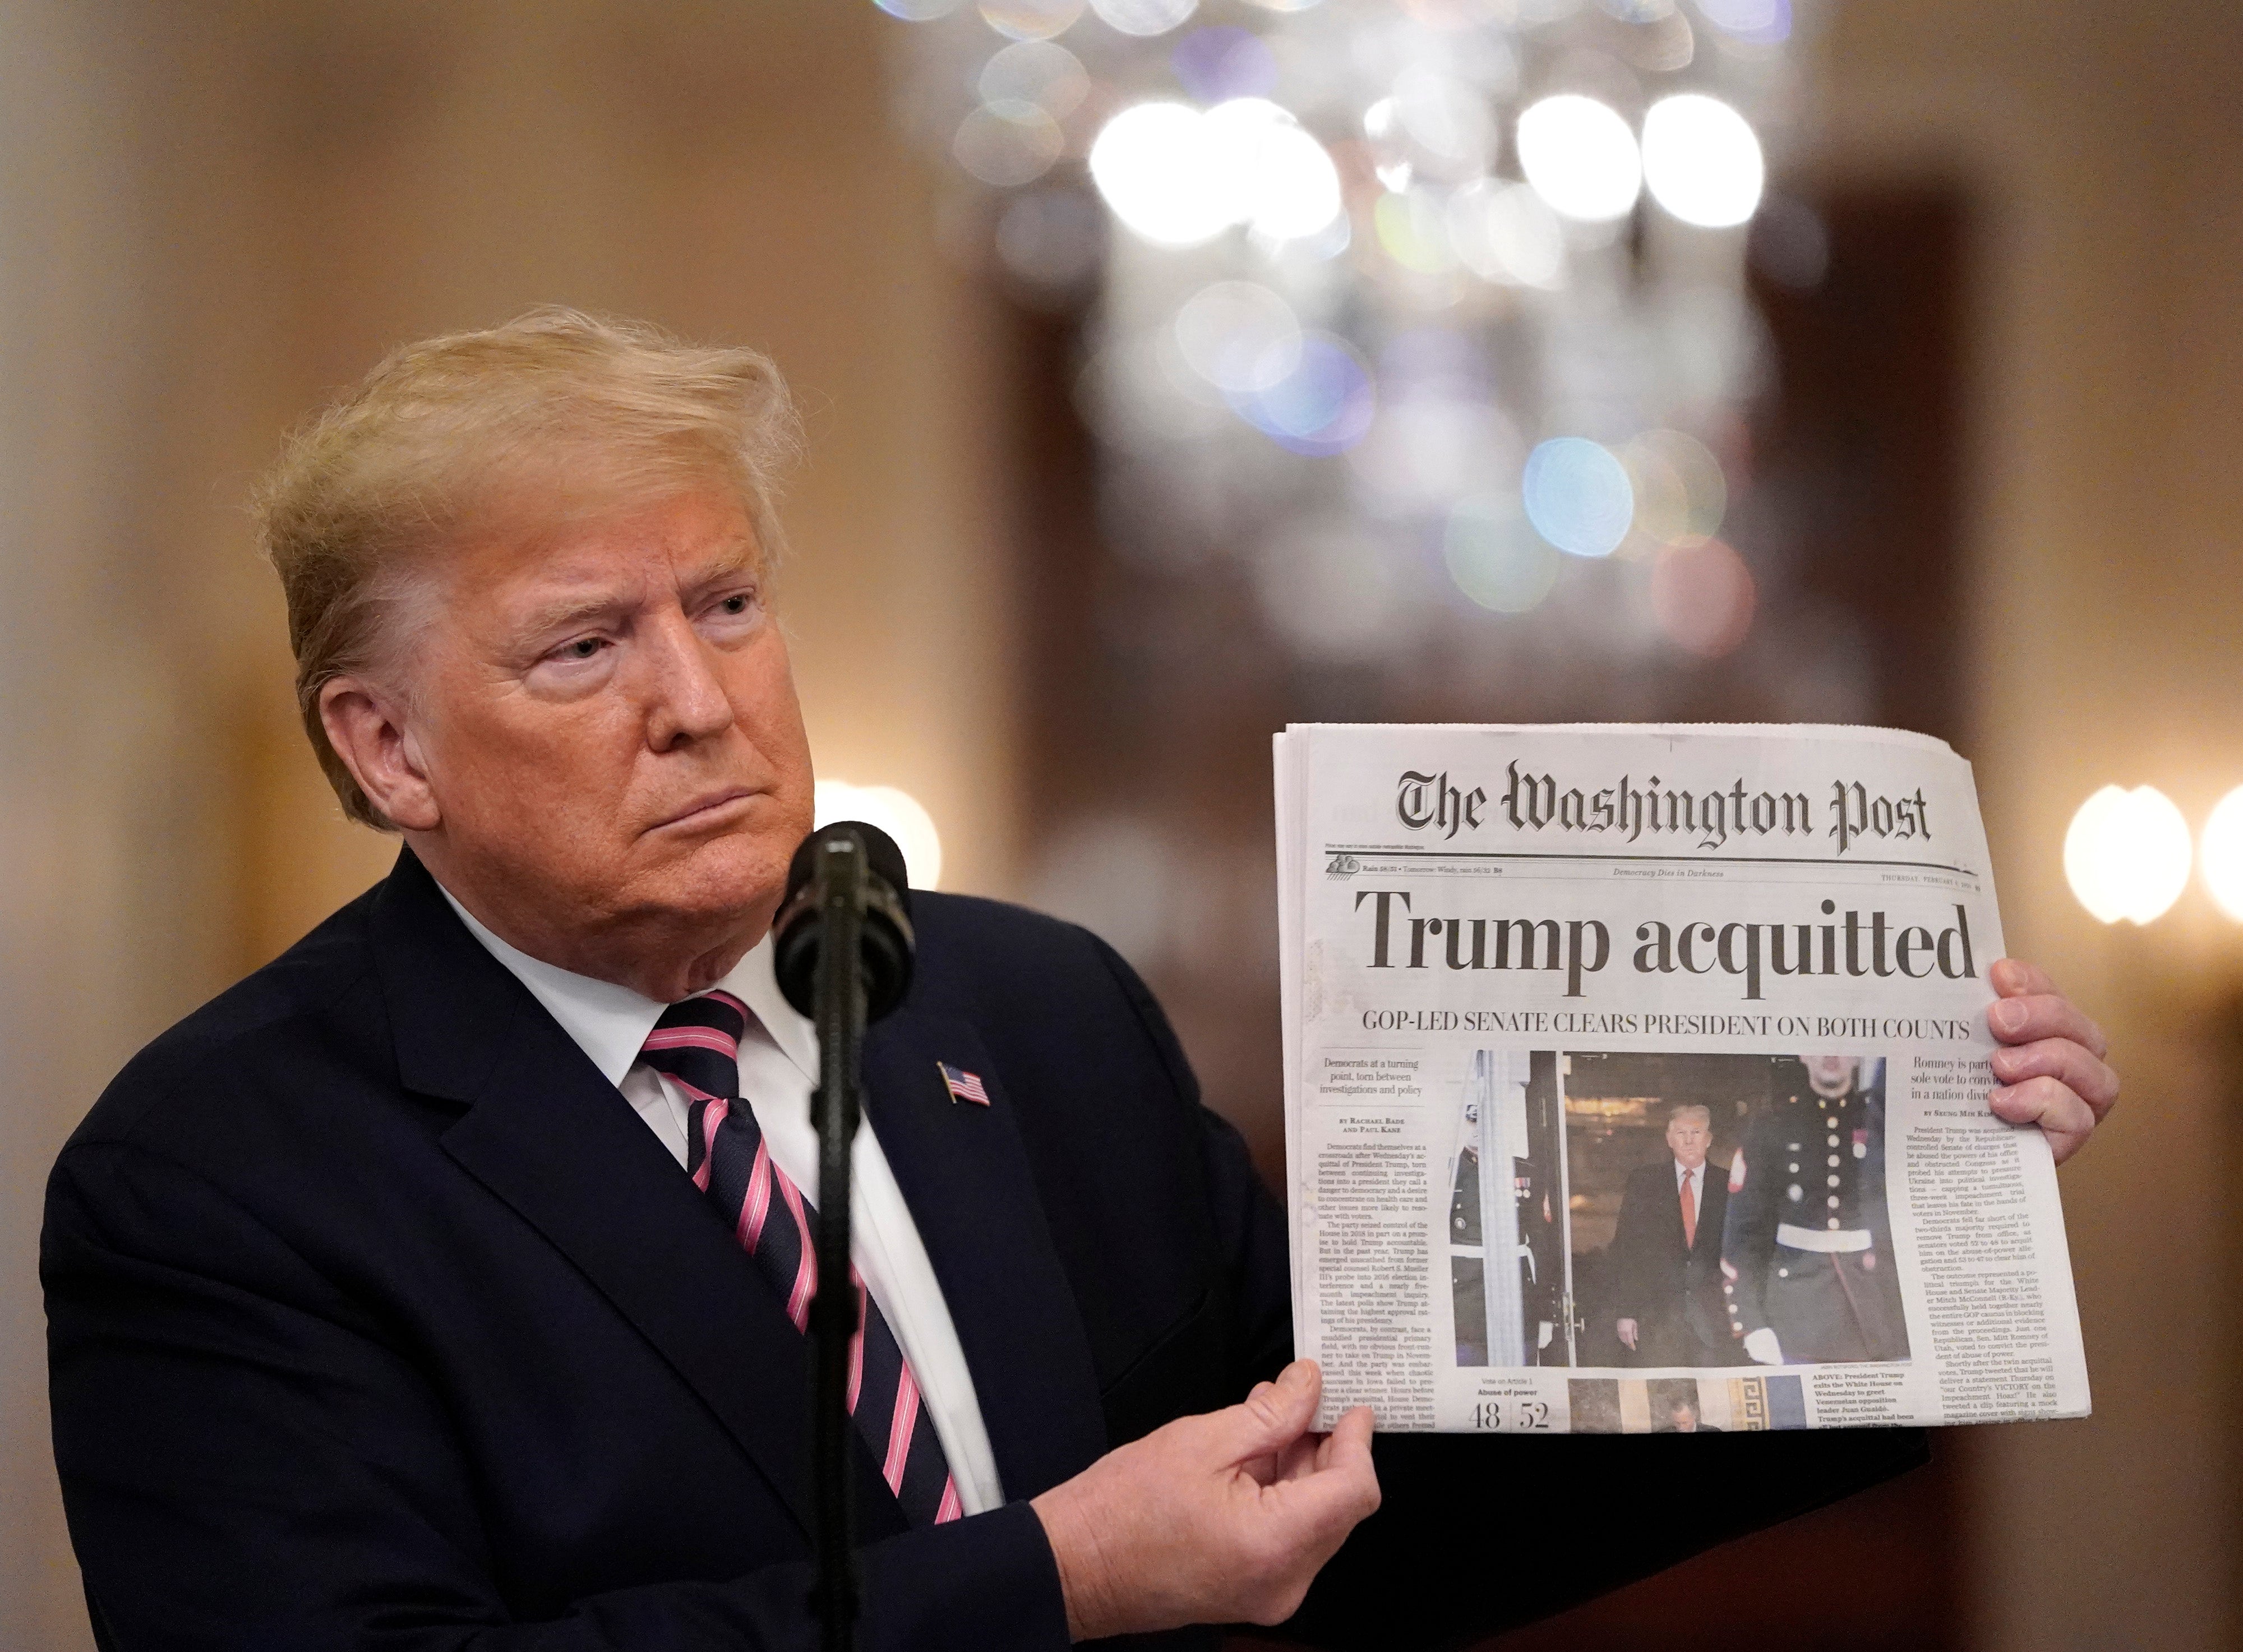 US President Donald Trump holds a copy of The Washington Post as he speaks in the East Room of the White House one day after the US Senate acquitted on two articles of impeachment, ion February 6, 2020 in Washington, DC